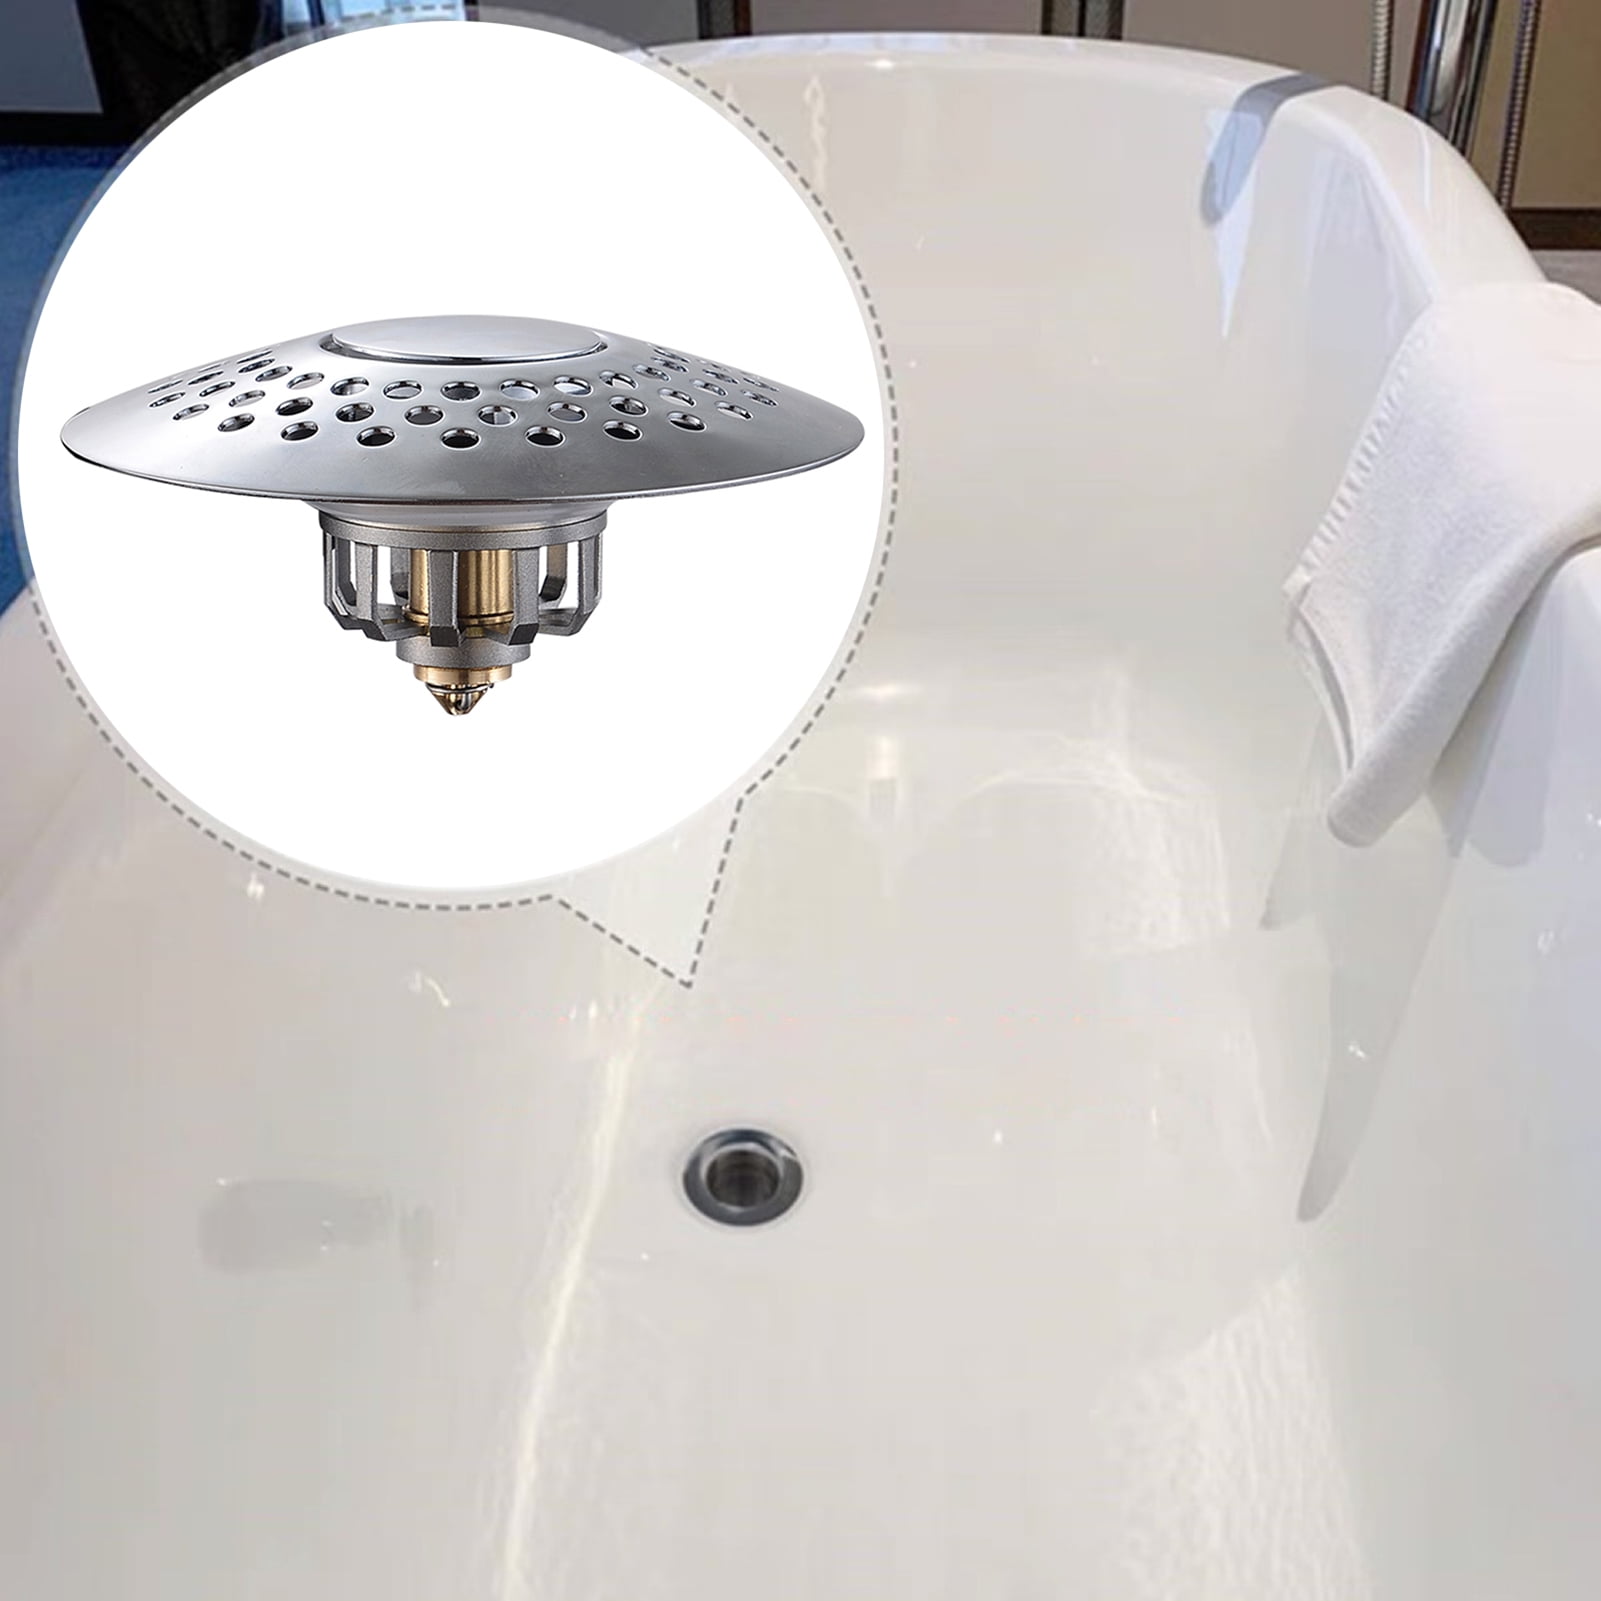 Stauber Best Bathtub Hair Catcher and Tub Stopper- two in one device t